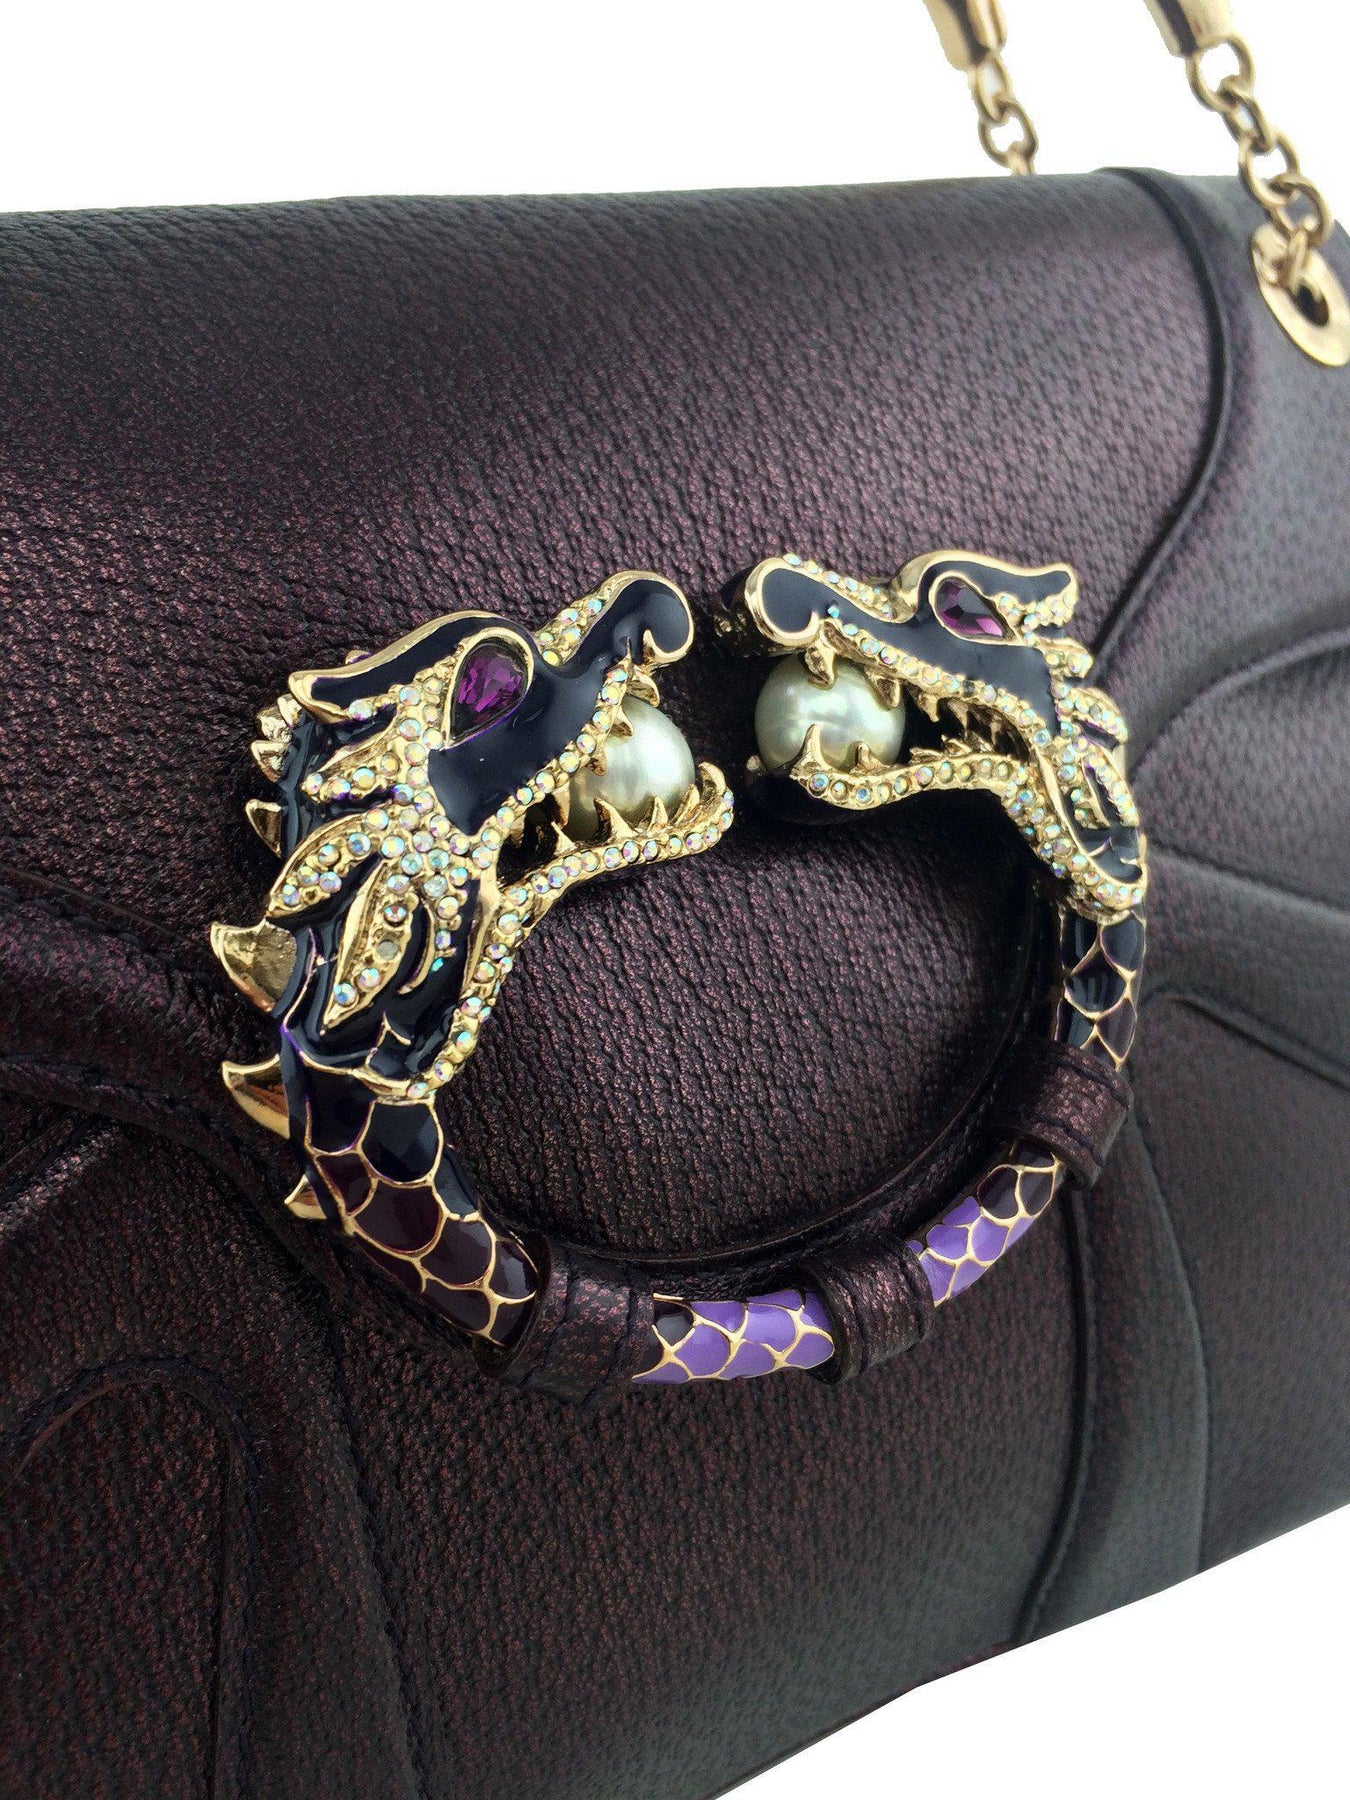 Gucci by Tom Ford Limited Edition Purple Leather Dragon Shoulder Bag